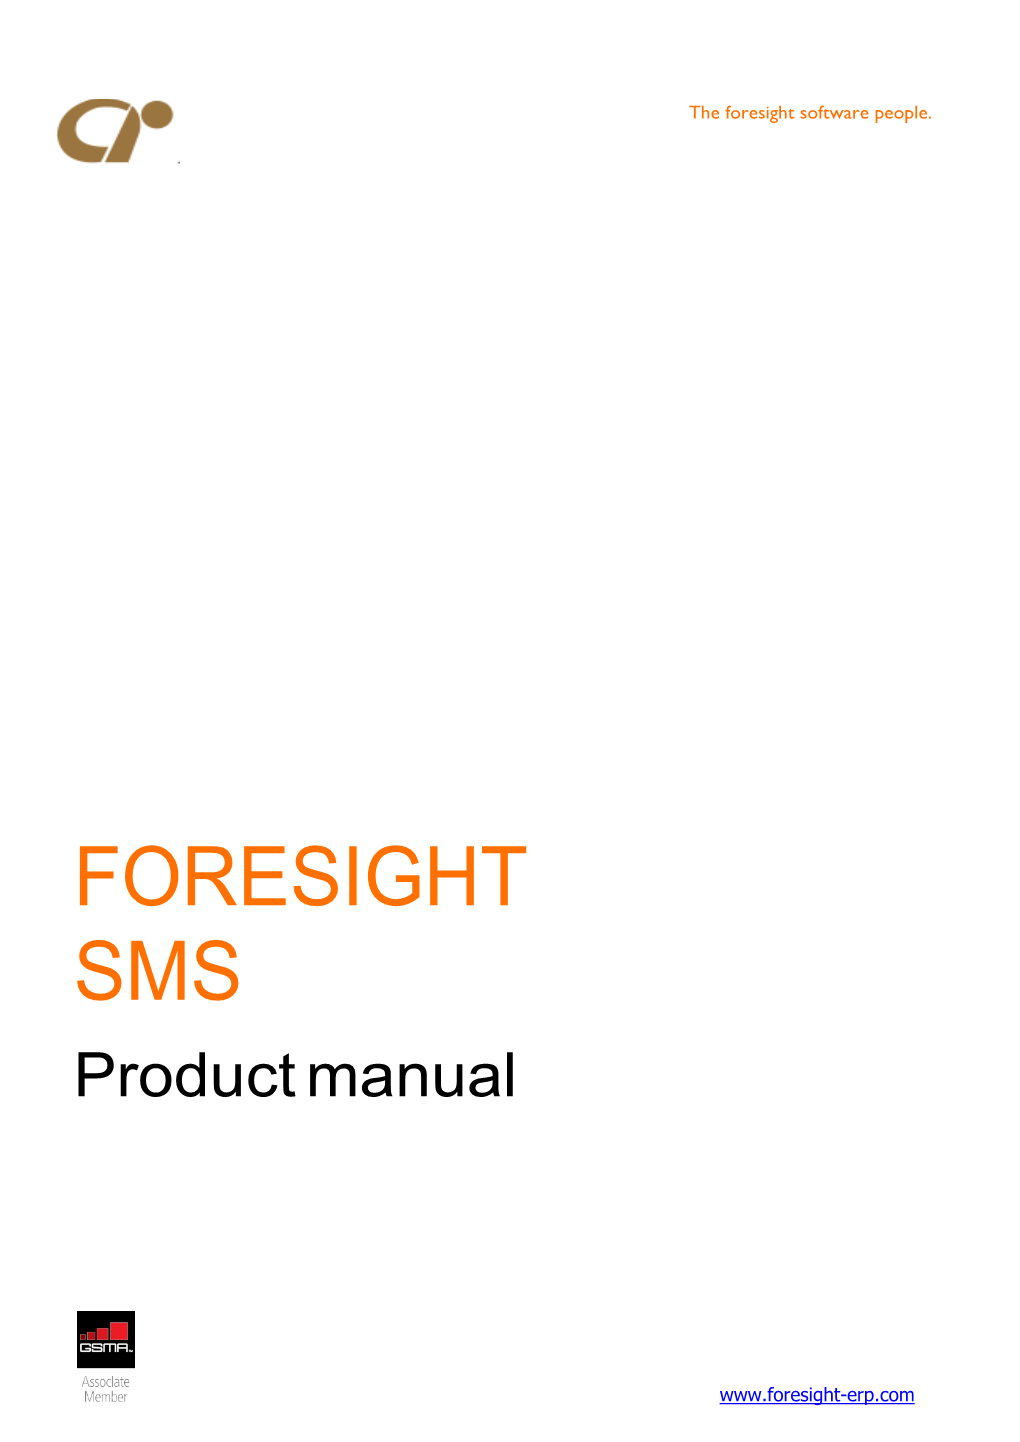 Foresight Software People